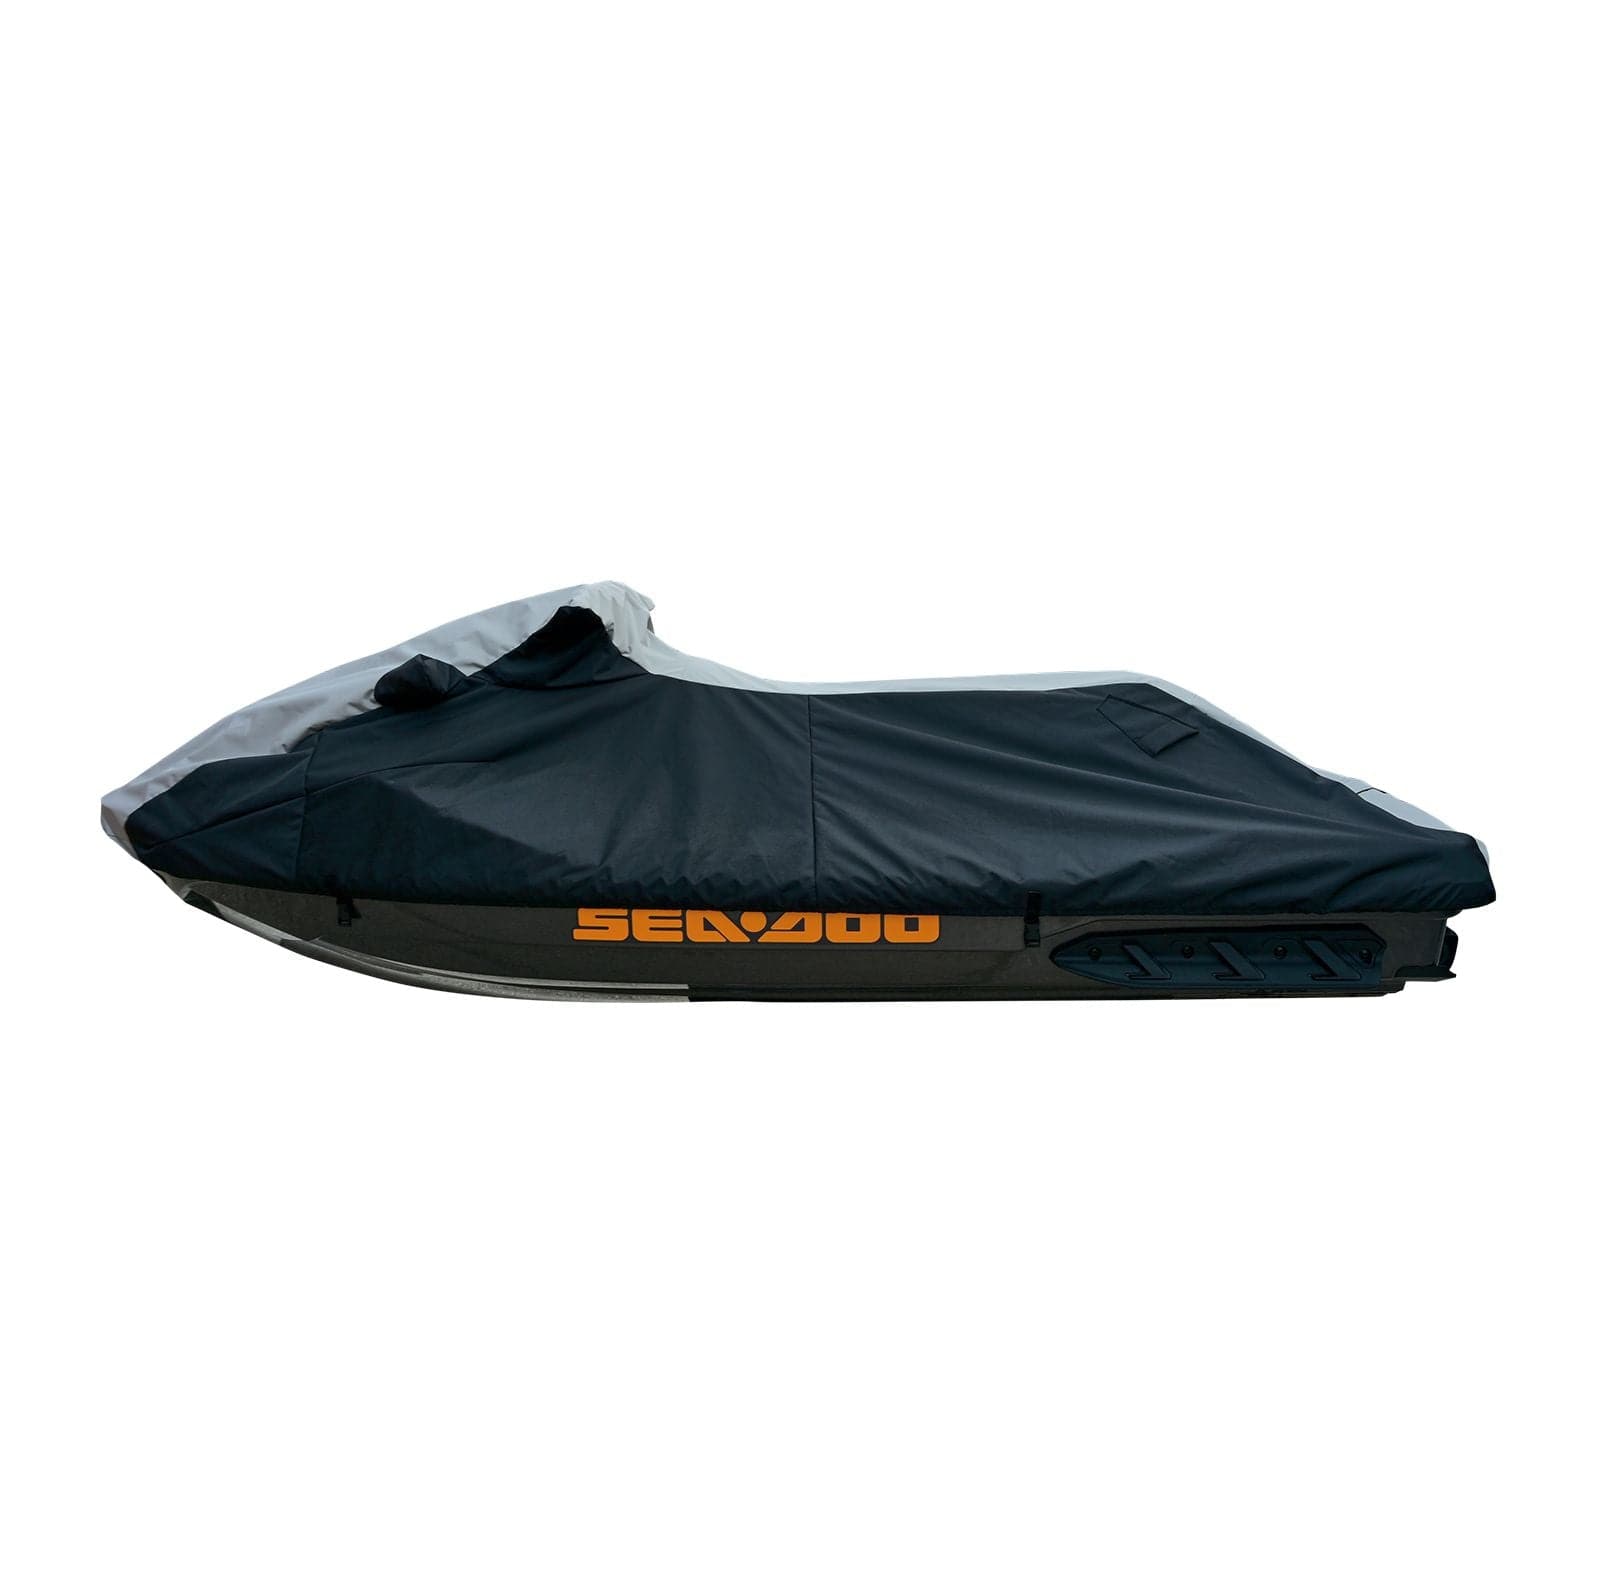 Trailerable Yamaha 2015-2018 VX (all) 2017-2018 GP1800 Storage cover with vents